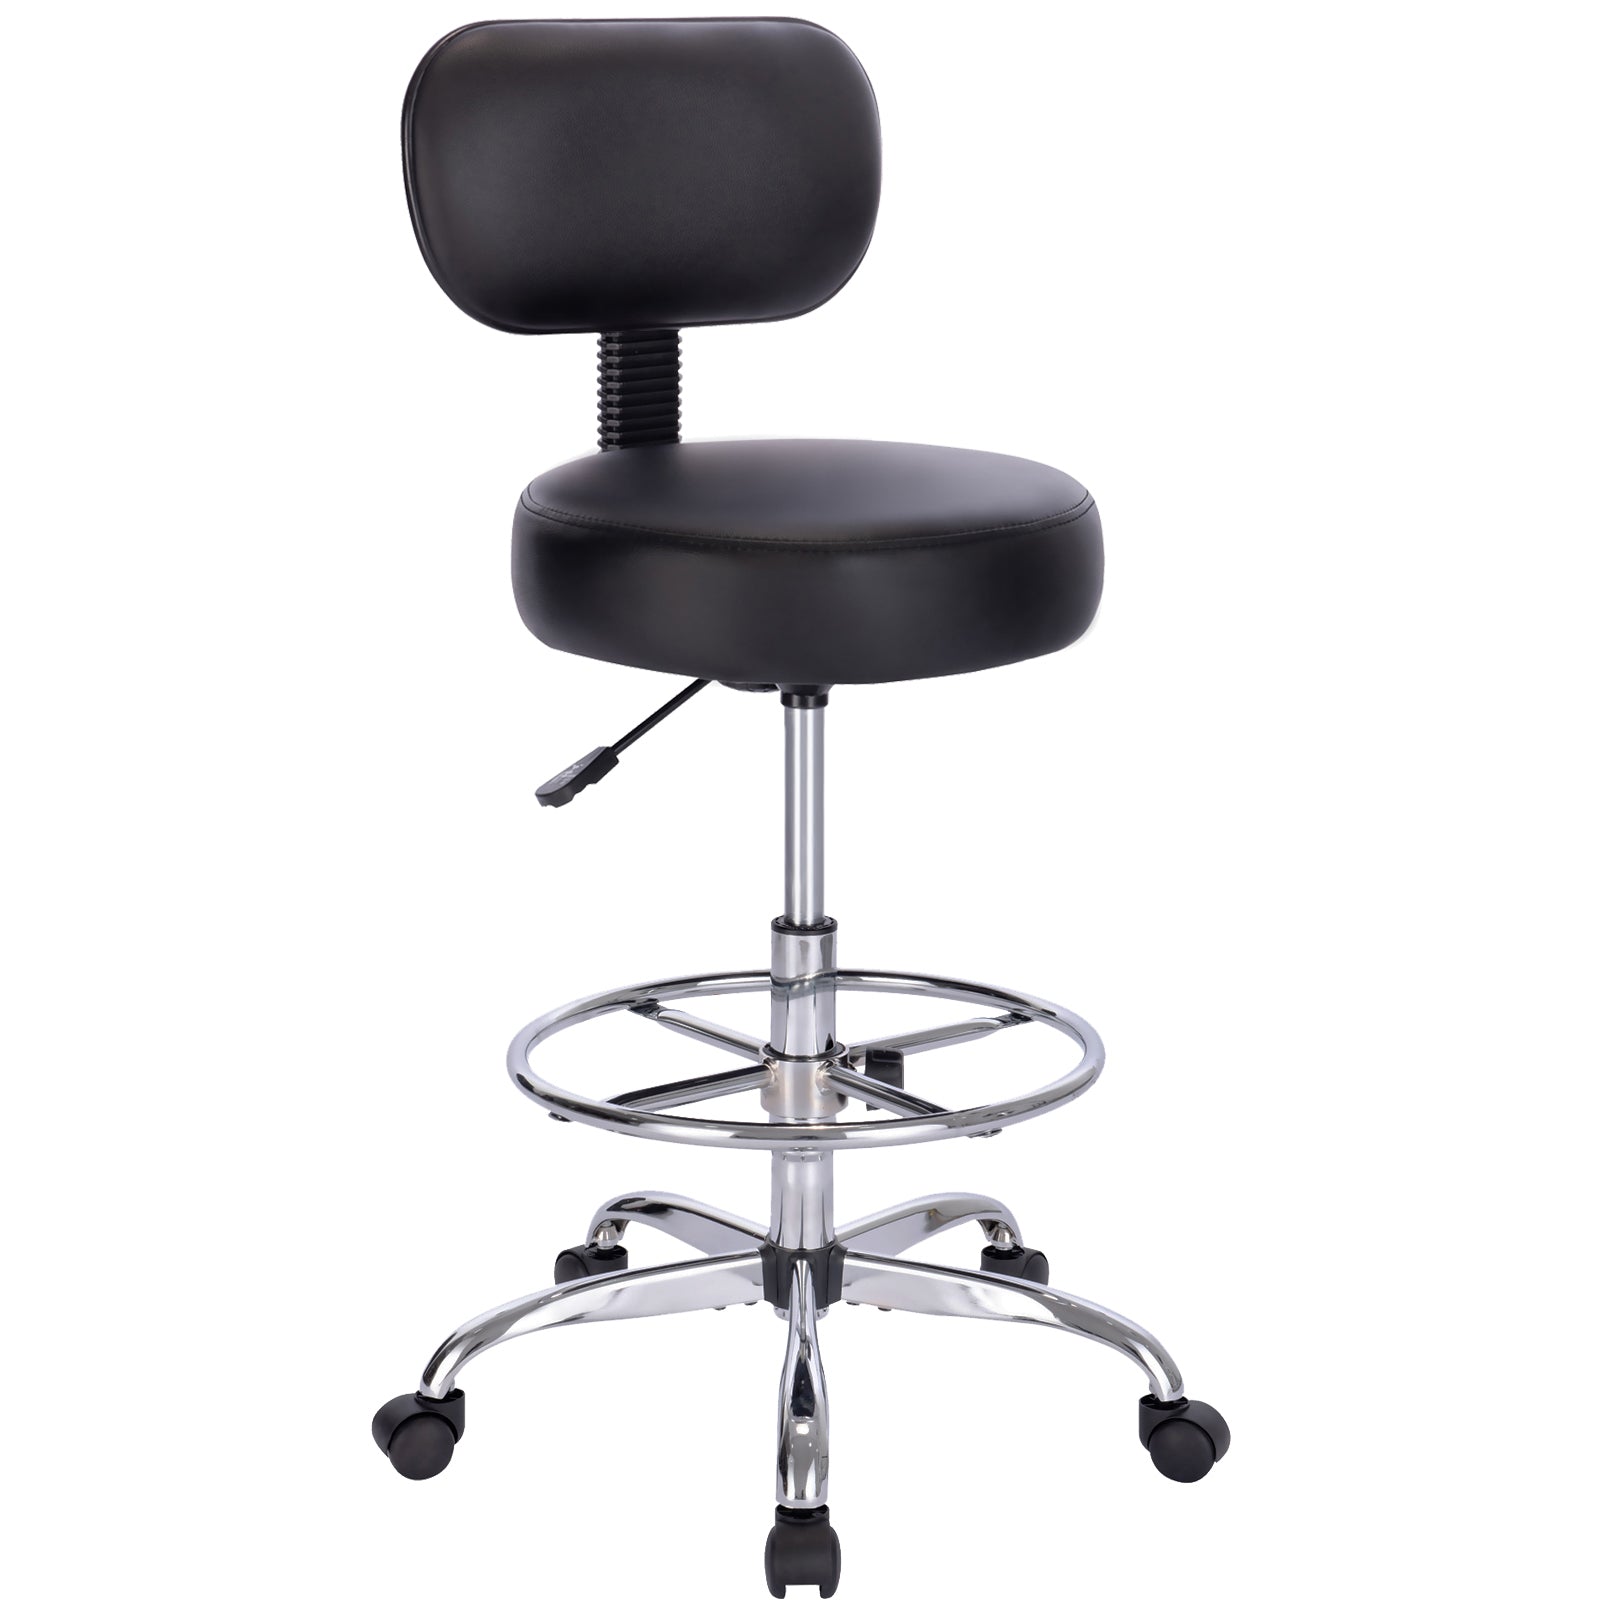 SUPERJARE Drafting Chair with Back, Adjustable Foot Rest Rolling Stool